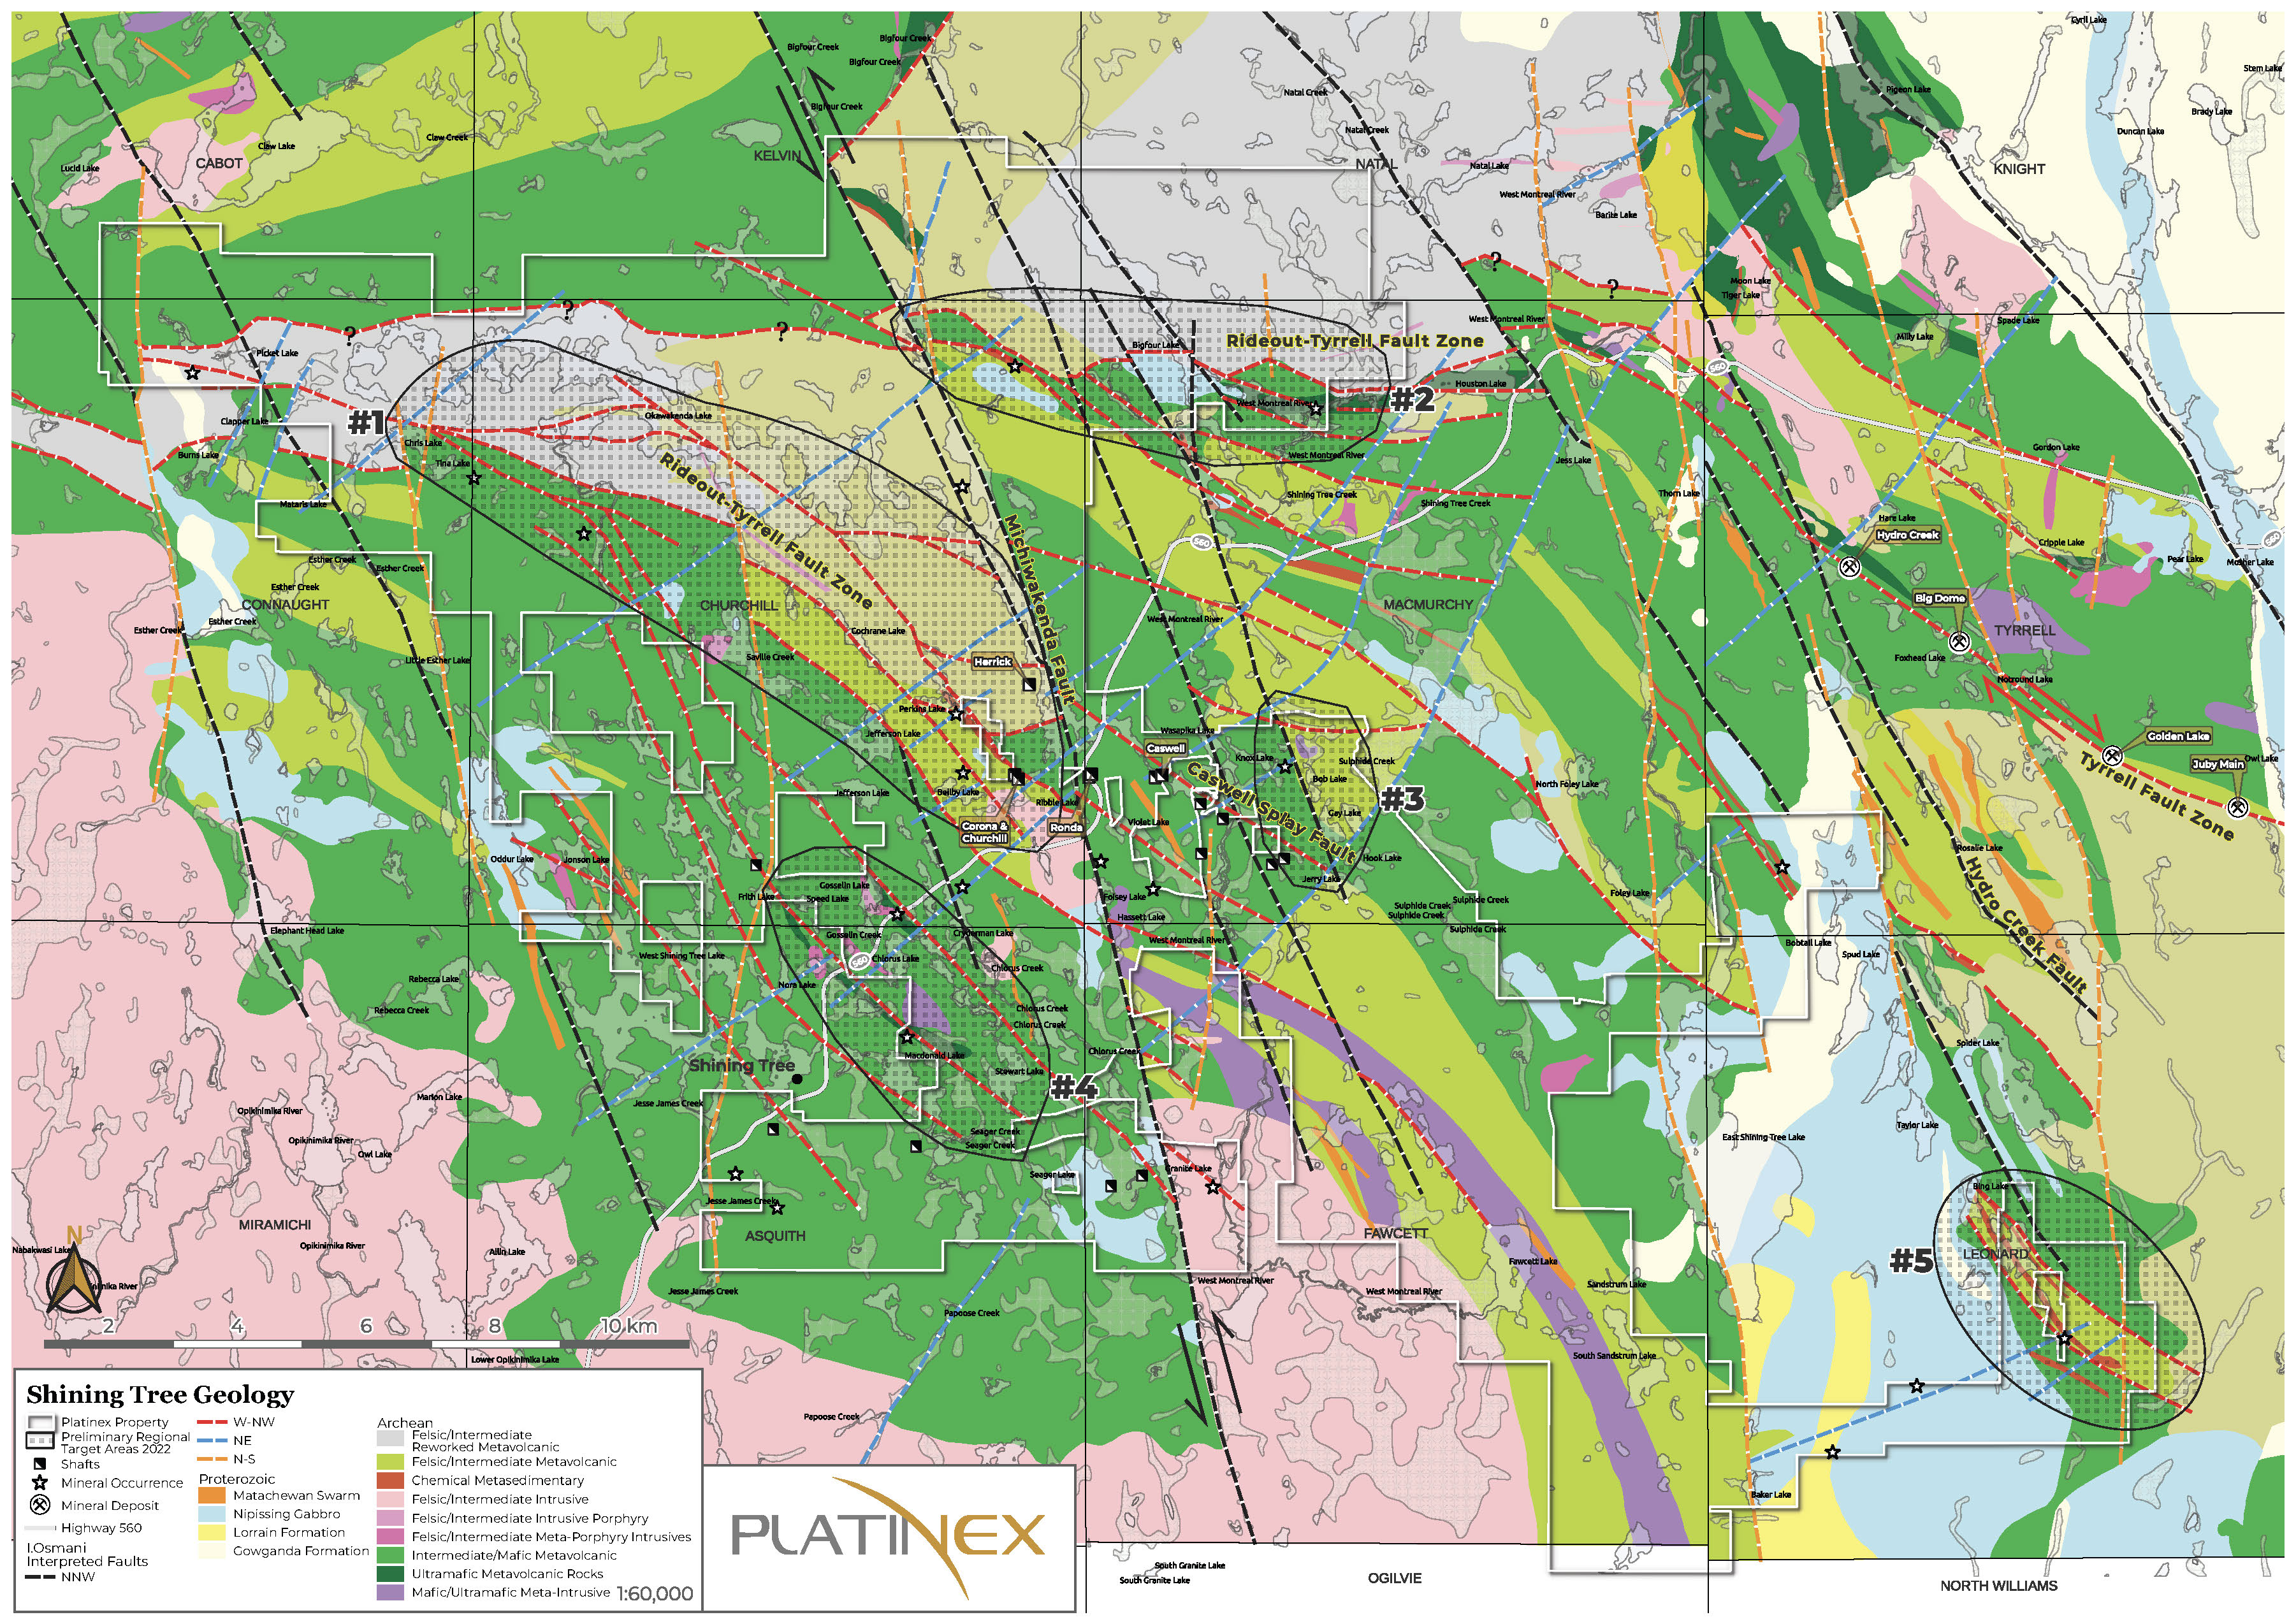 PR Image 1 - Interpreted Structural Geology Map with Exploration Areas (2)